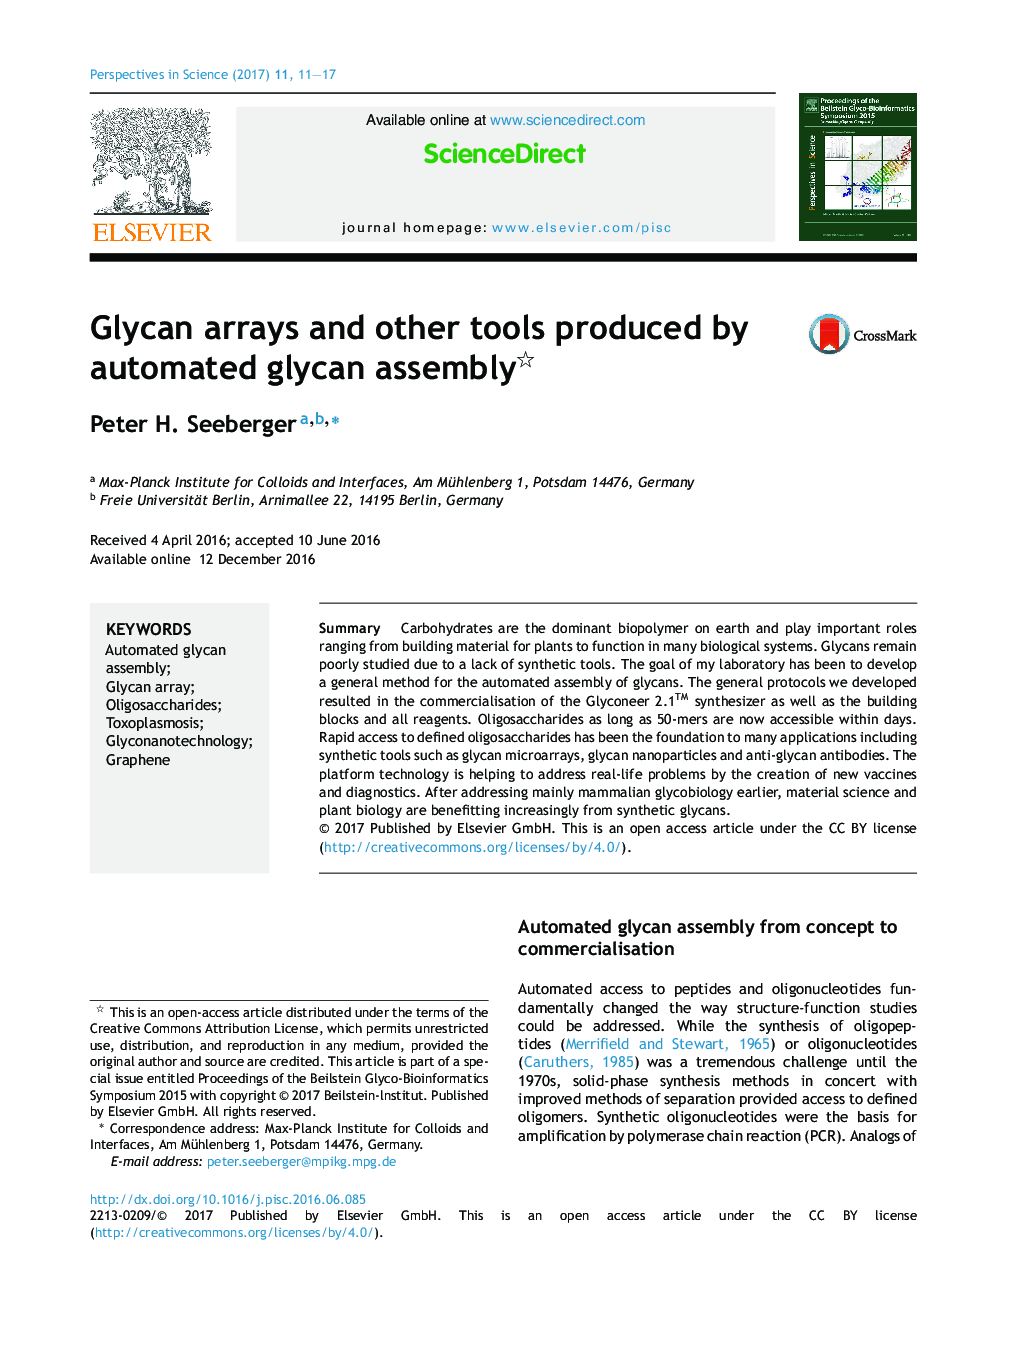 Glycan arrays and other tools produced by automated glycan assembly